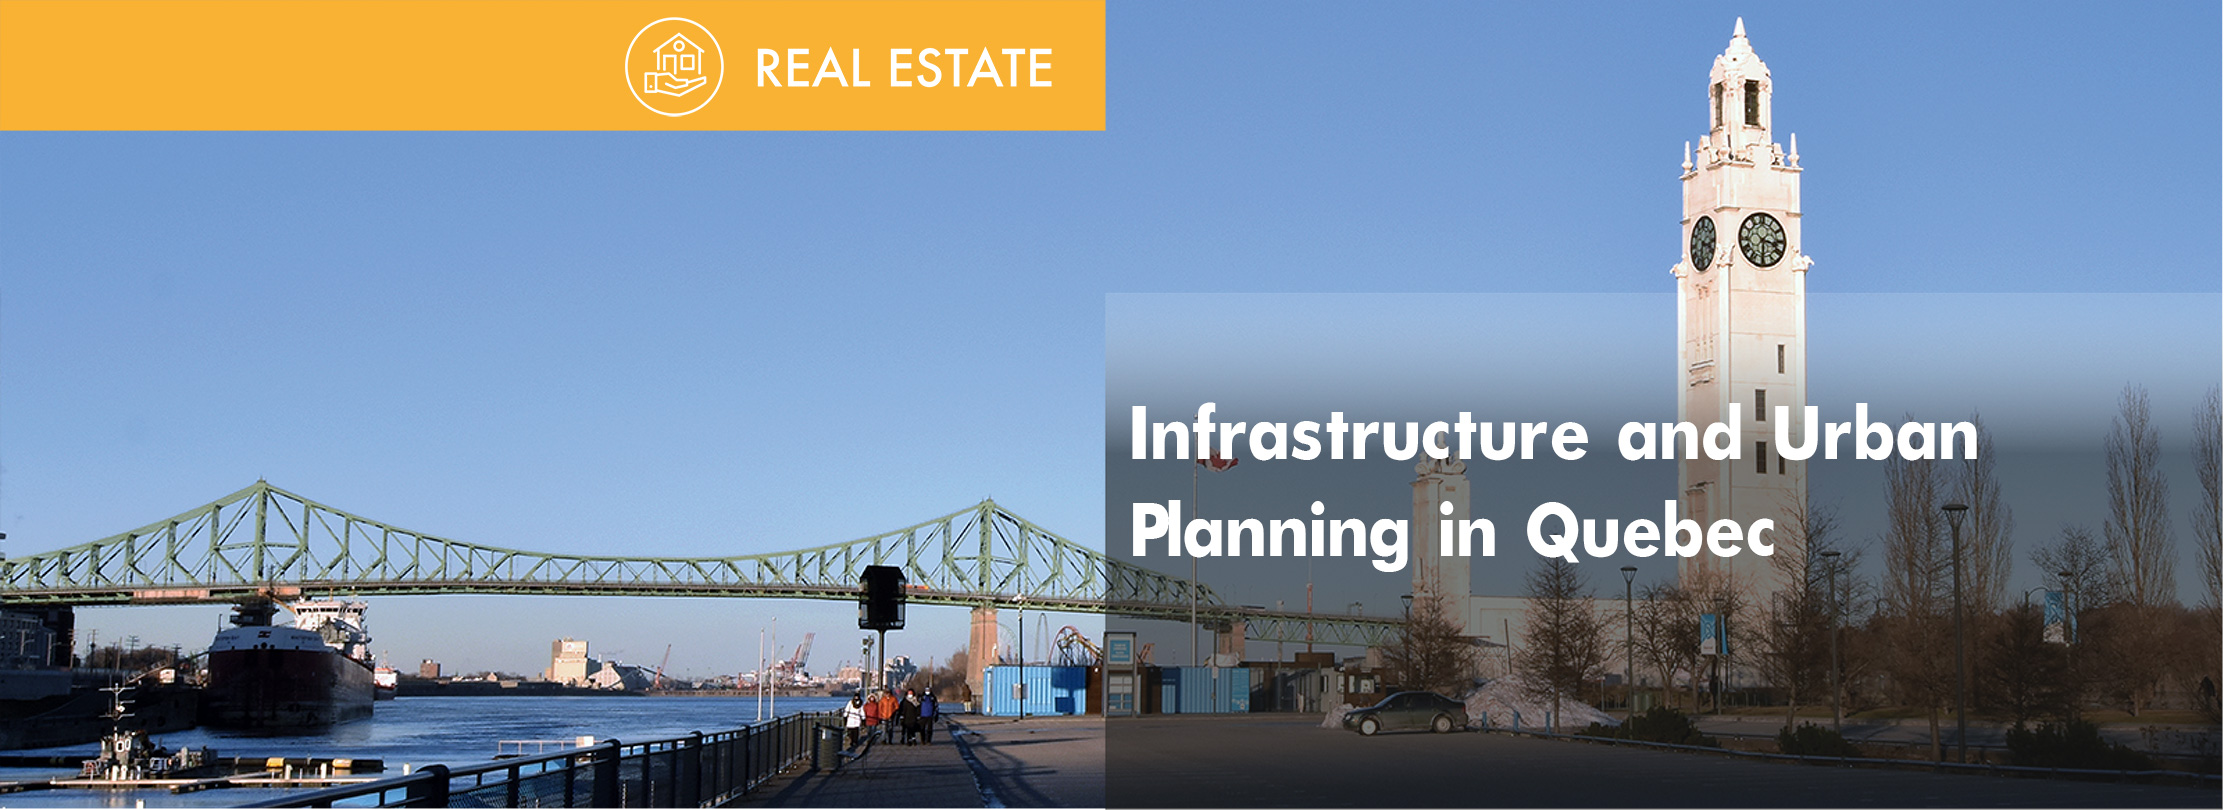 Infrastructure and Urban Planning in Quebec